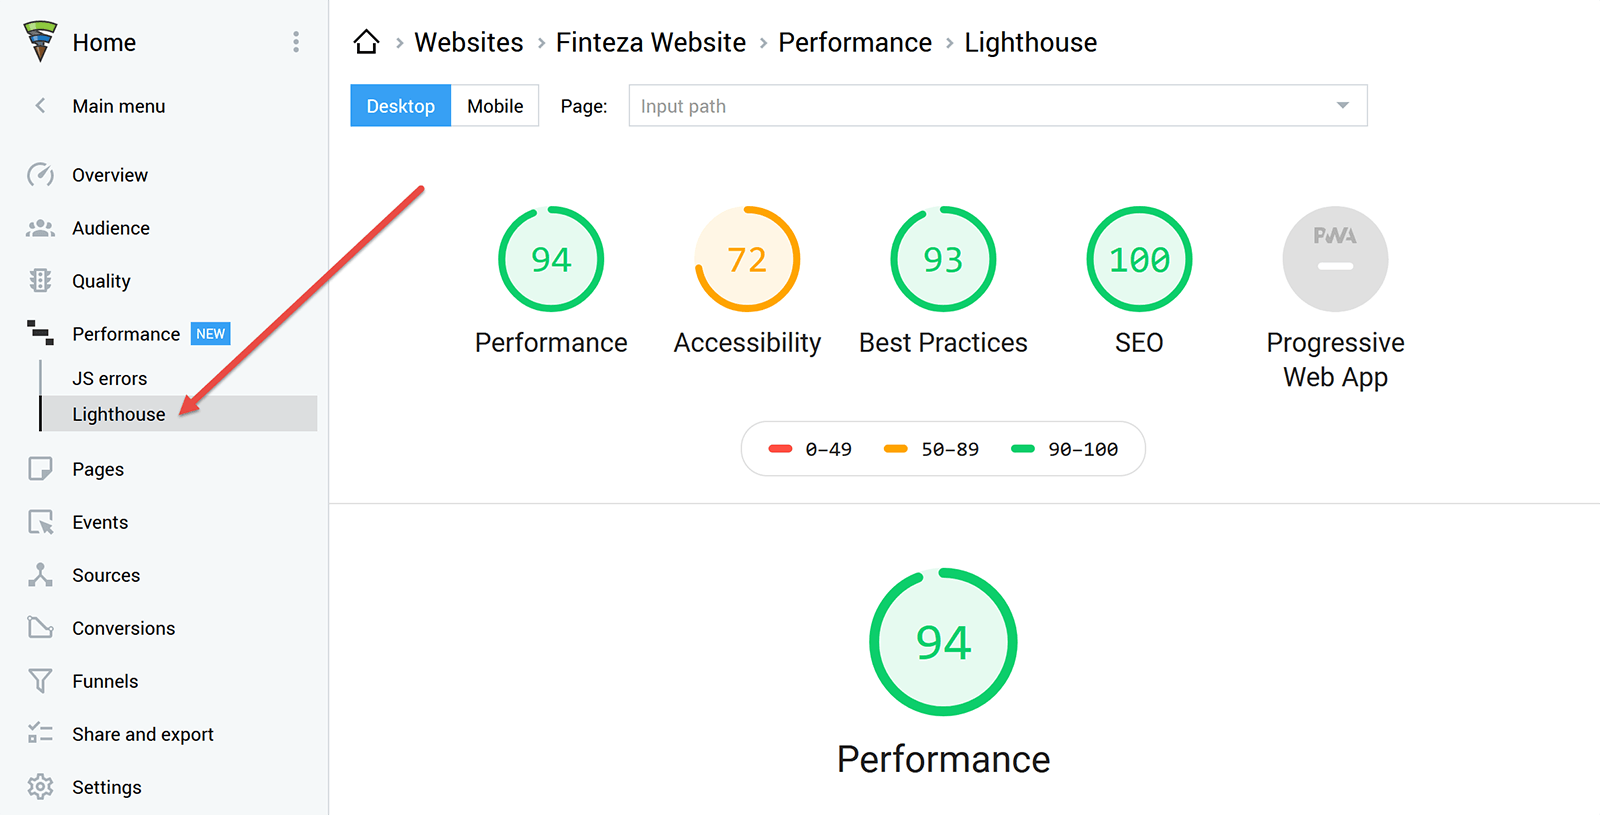 Find the new report in the Performance section